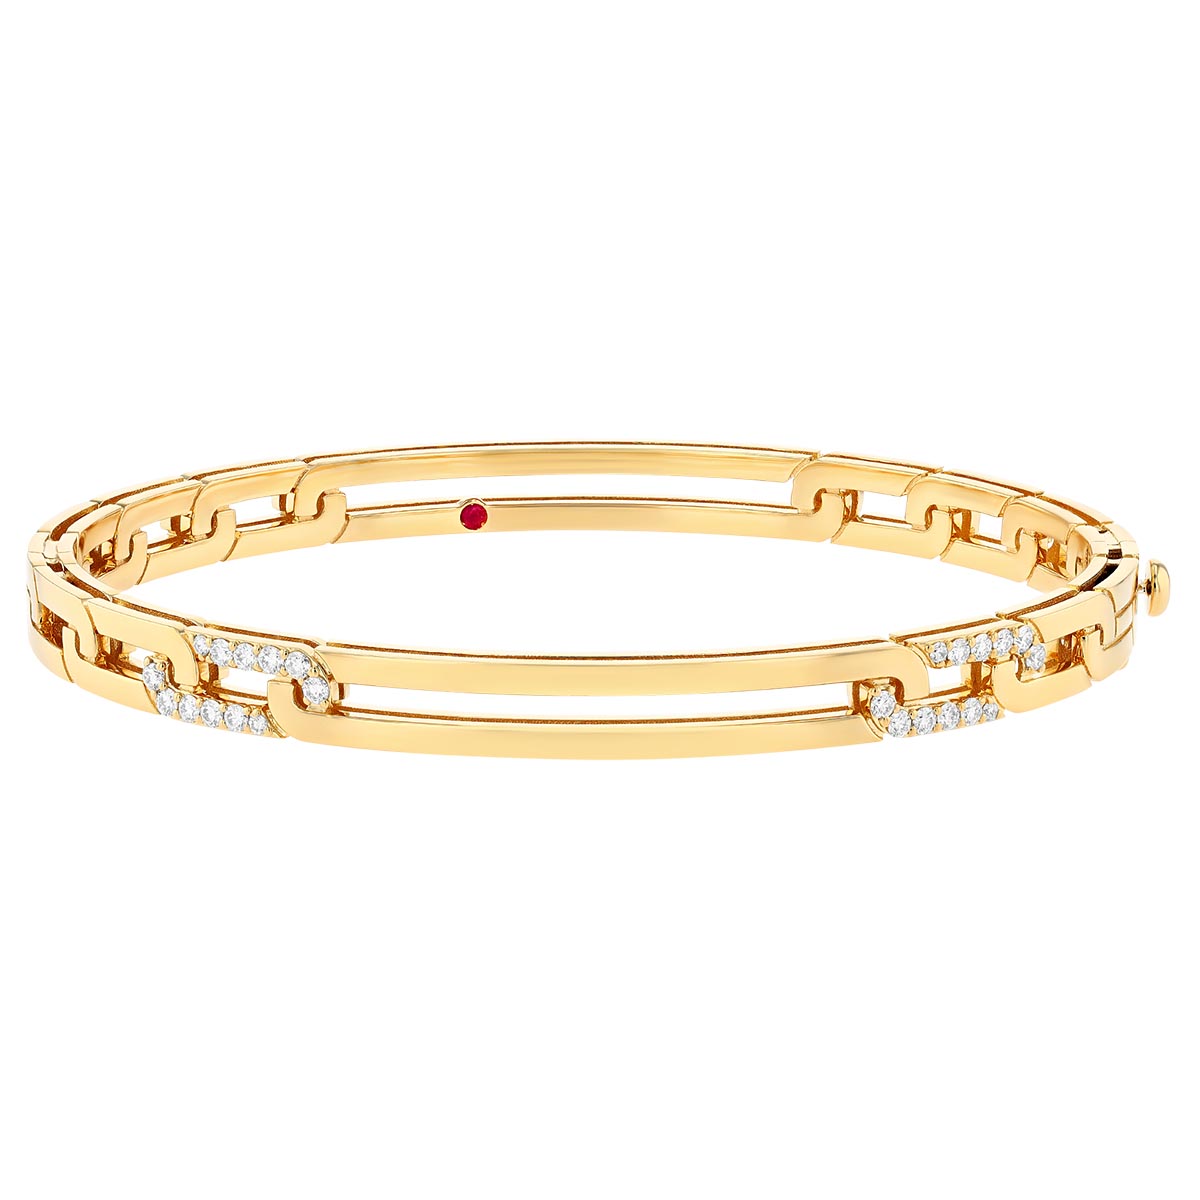 Navarra Diamond Accent & Extended Link Bangle Bracelet in Yellow 